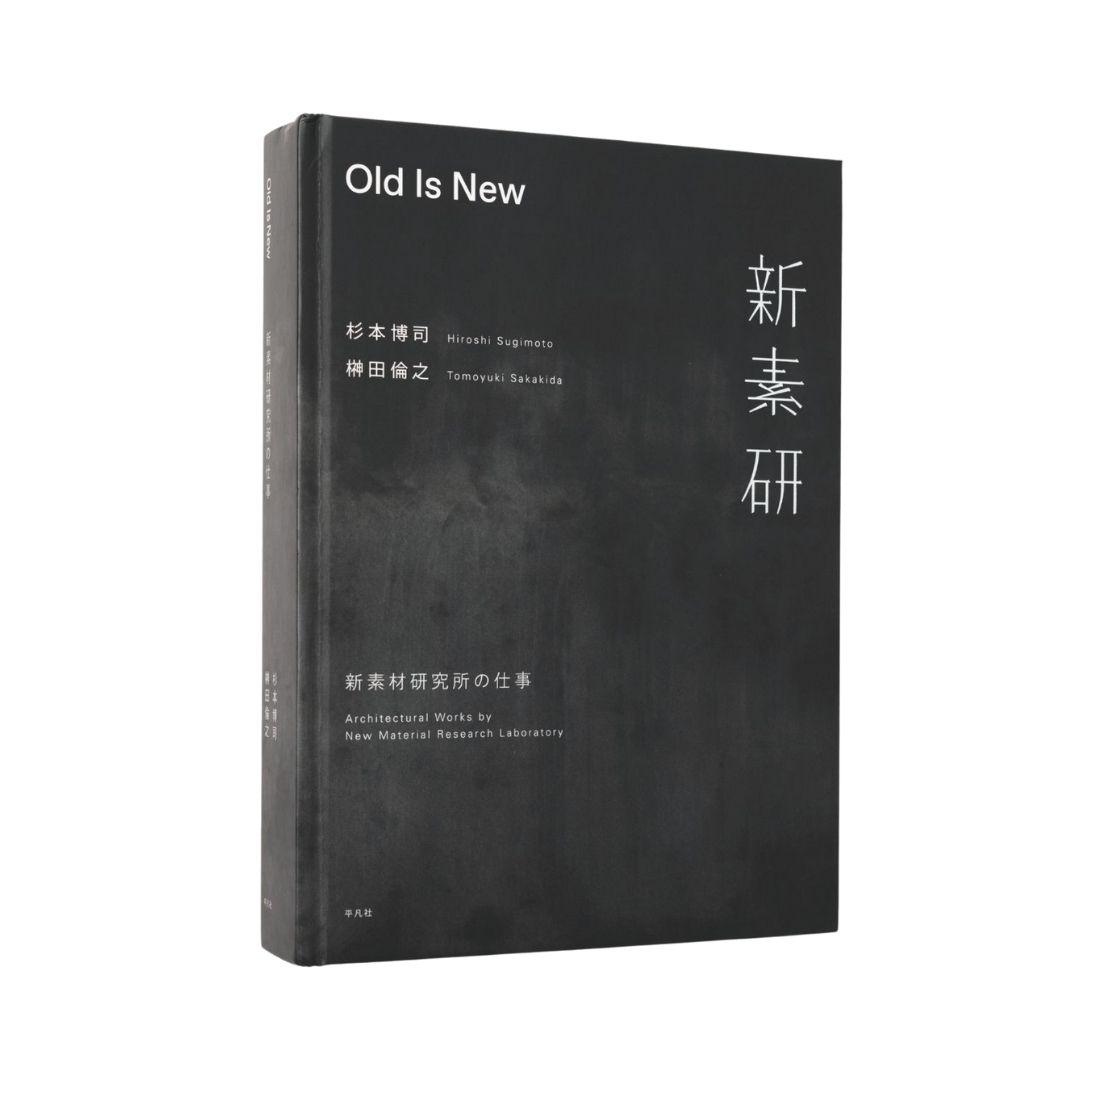 『Old Is New 新素材研究所の仕事』